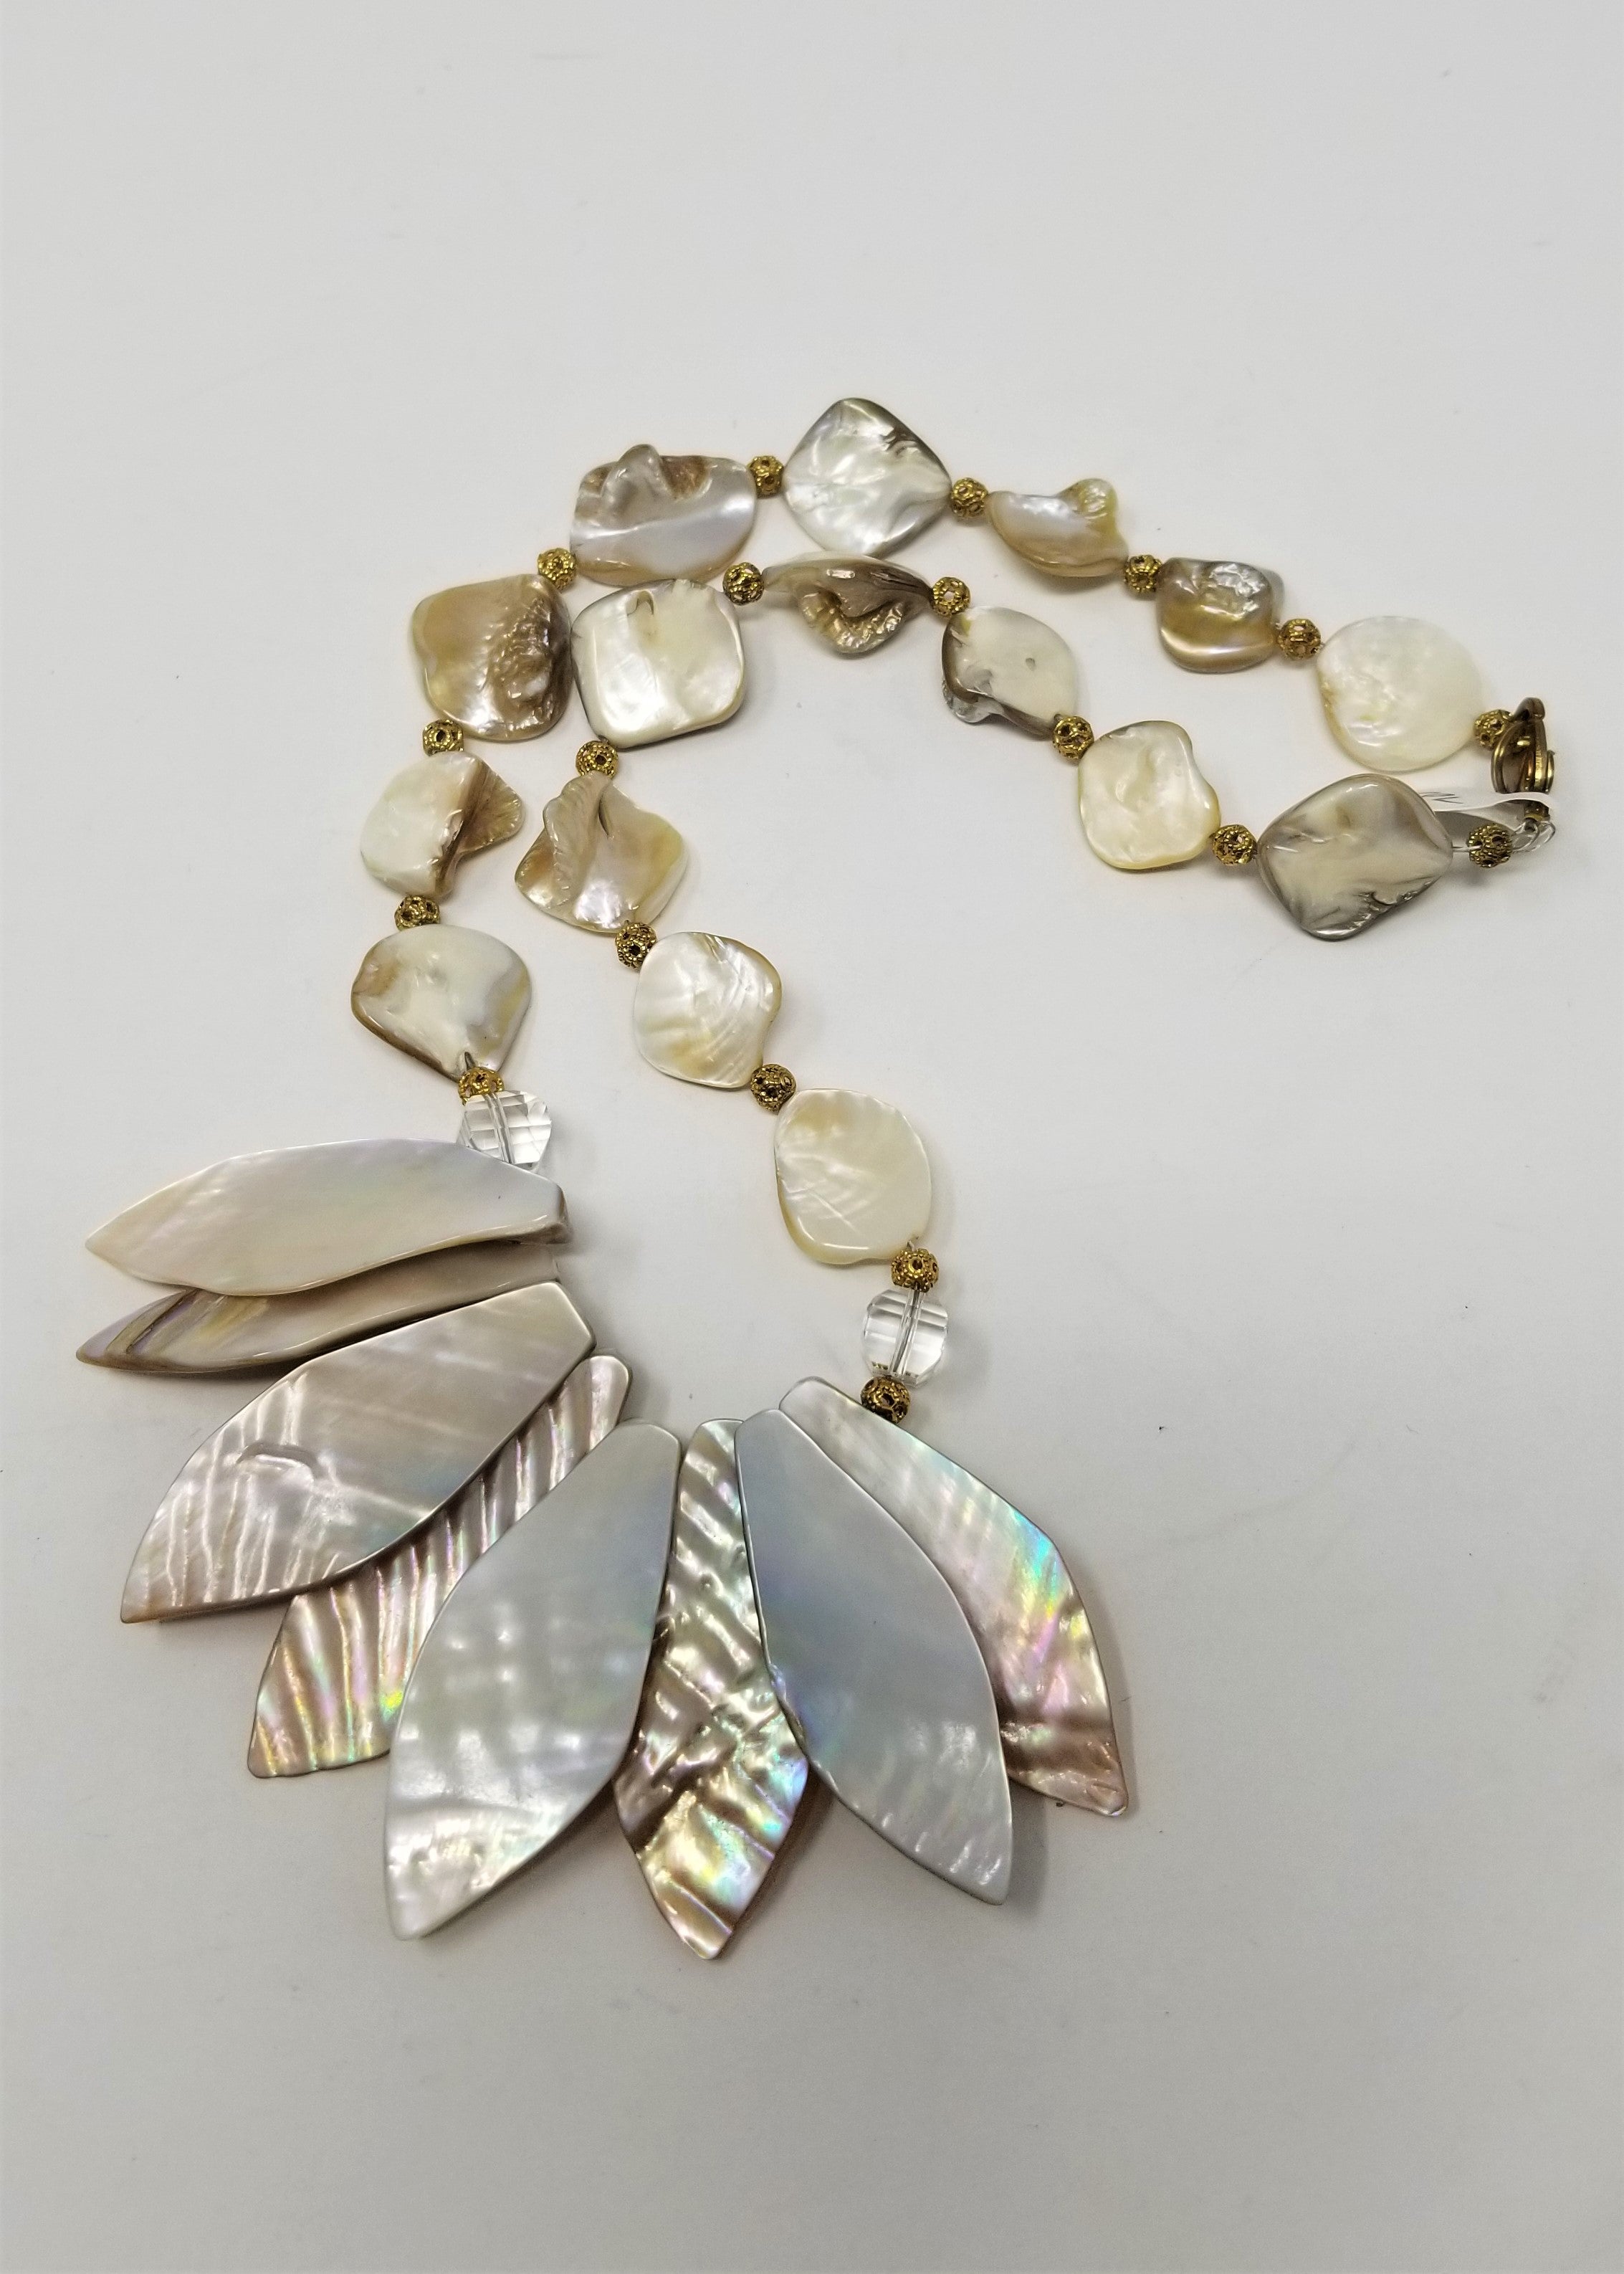 Stunning MOP Shell Necklace 16" Choker Lots of Luster